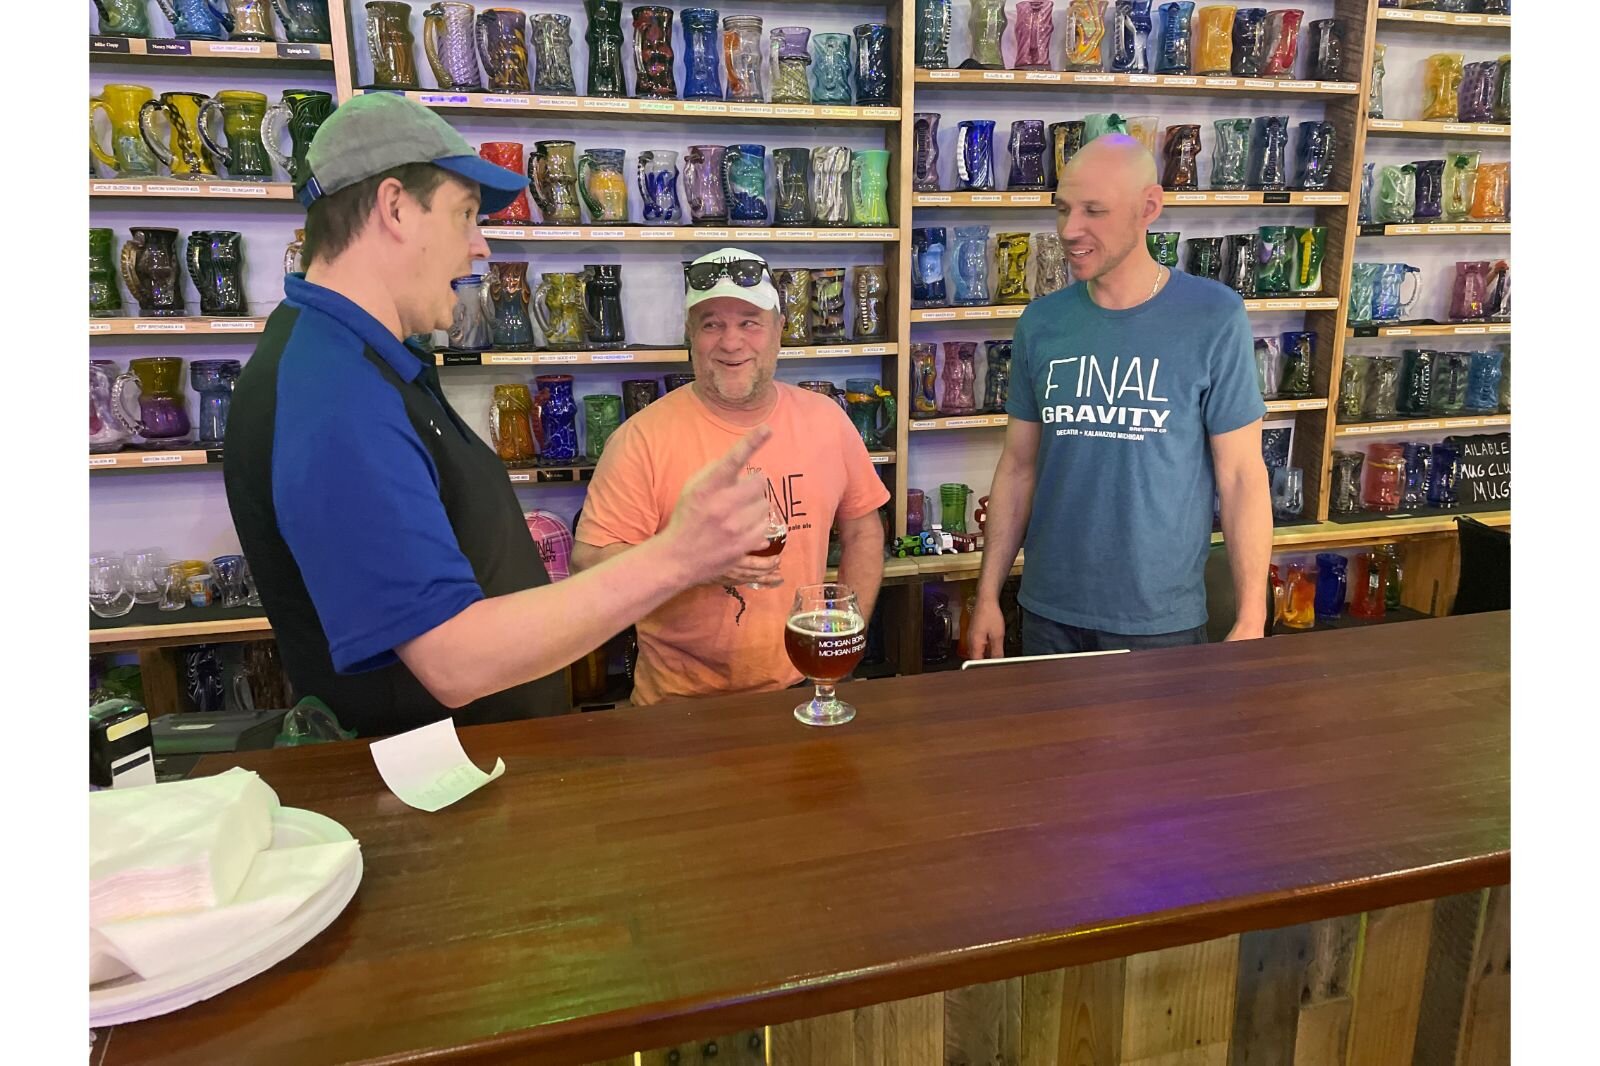 At Final Gravity, from left, are Kevin Holman, General Manager Final Gravity; Kevin Christensen, Owner and Master Brewer Final Gravity; and Brian Mc Donald Bartender and an aspiring brewer, enrolled in the KVCC brewing program. 